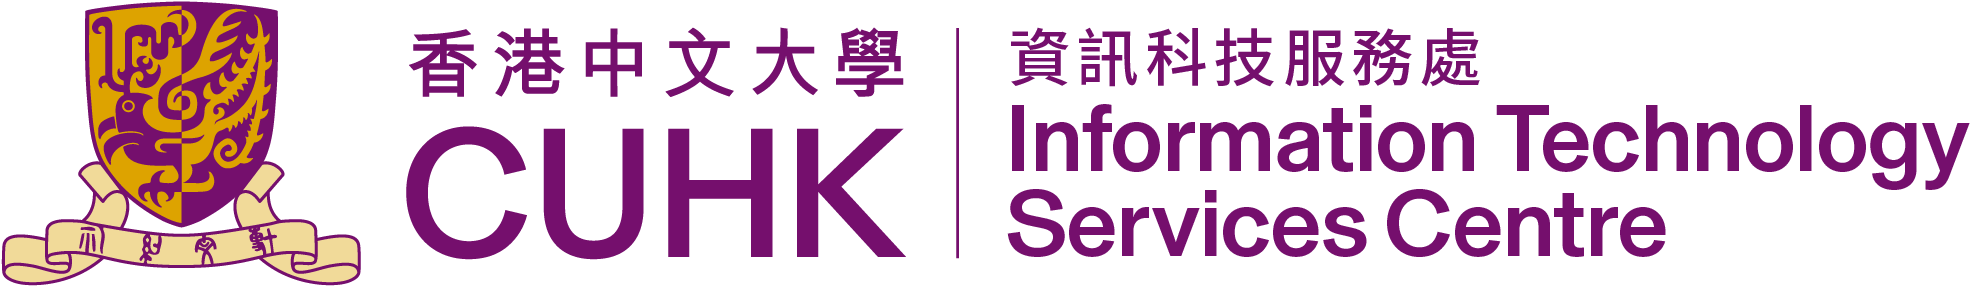 Information Technology Services Centre, The Chinese University of Hong Kong